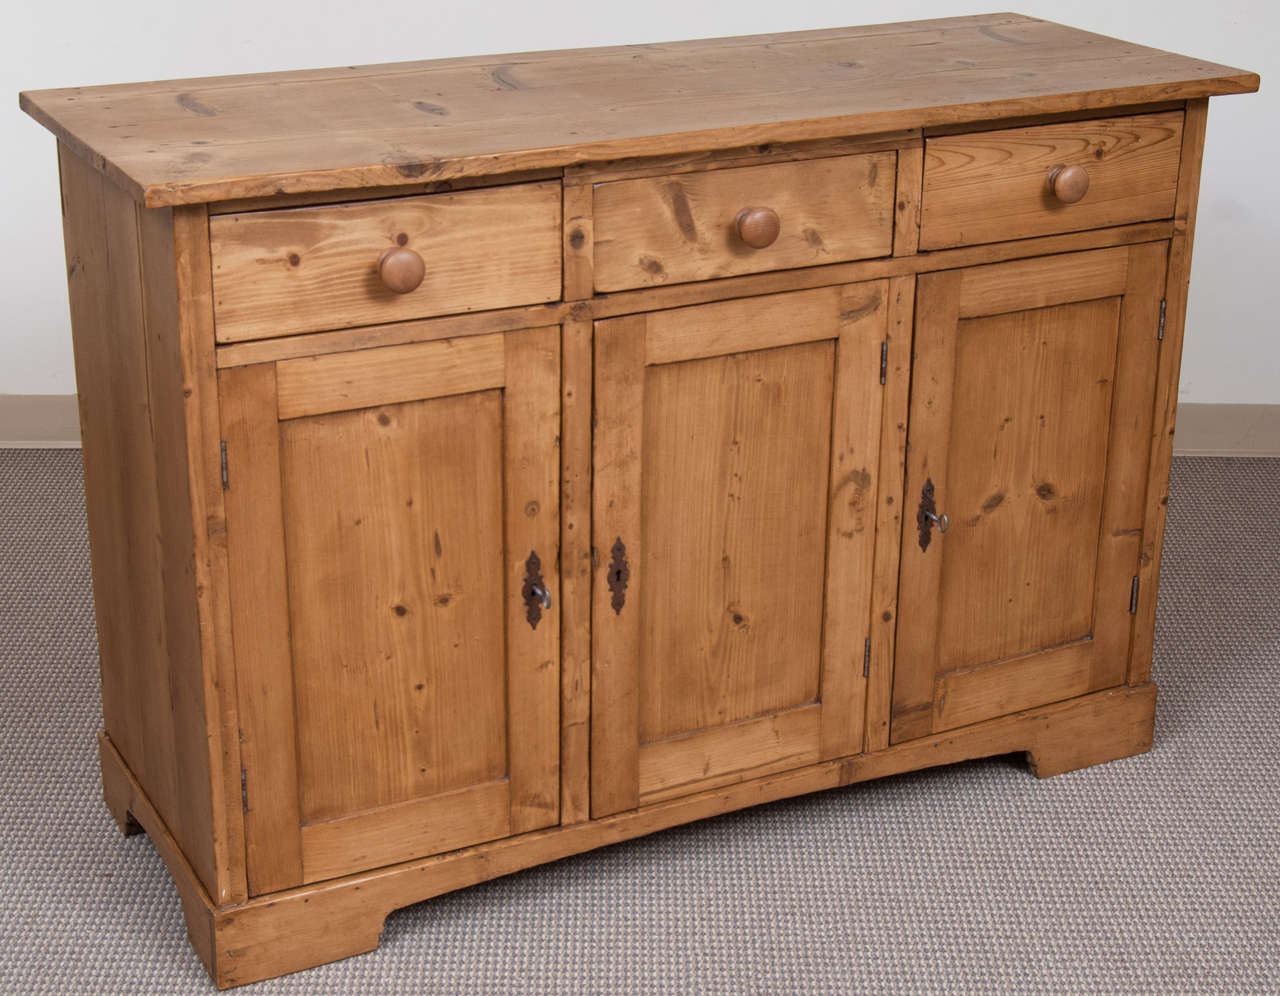 A plain and functional dresser base of generous size, featuring three hand-cut dovetailed drawers above three doors.  Great as a kitchen piece, a media centre or as storage in an office.